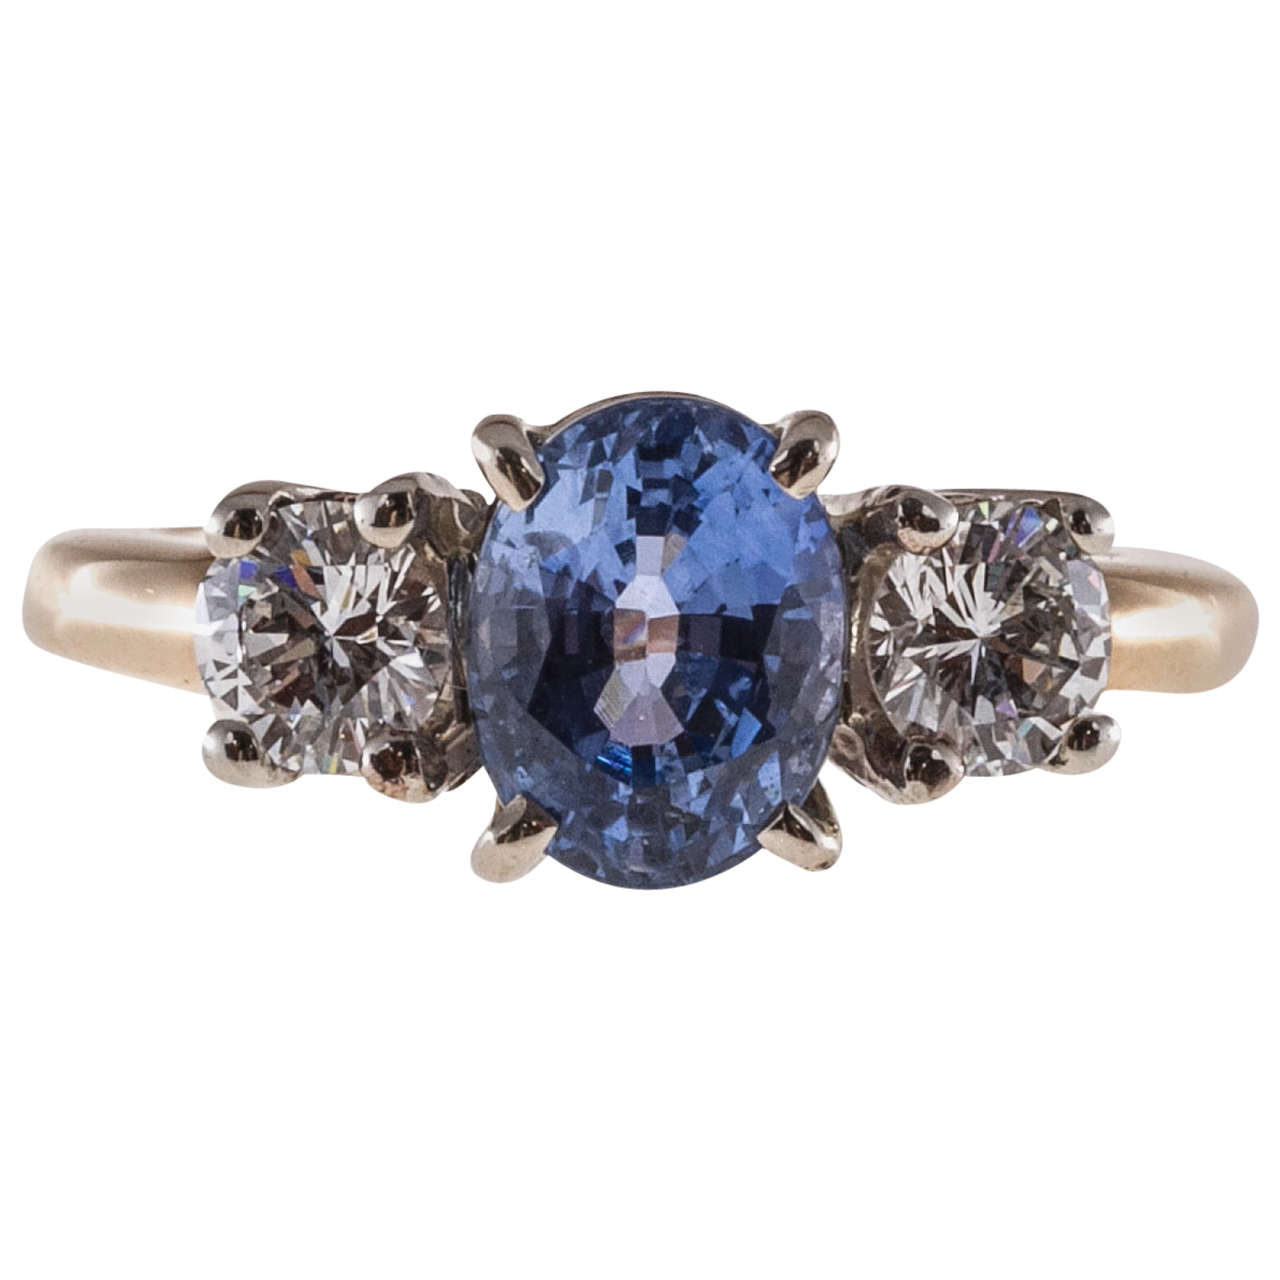 Untreated no heat medium bright blue oval Sapphire and round white diamond three-stone engagement ring in a 14k yellow white gold setting.

1 natural untreated oval medium bright periwinkle blue Sapphire, approx. total weight 2.14cts, VS2, 8.05 x